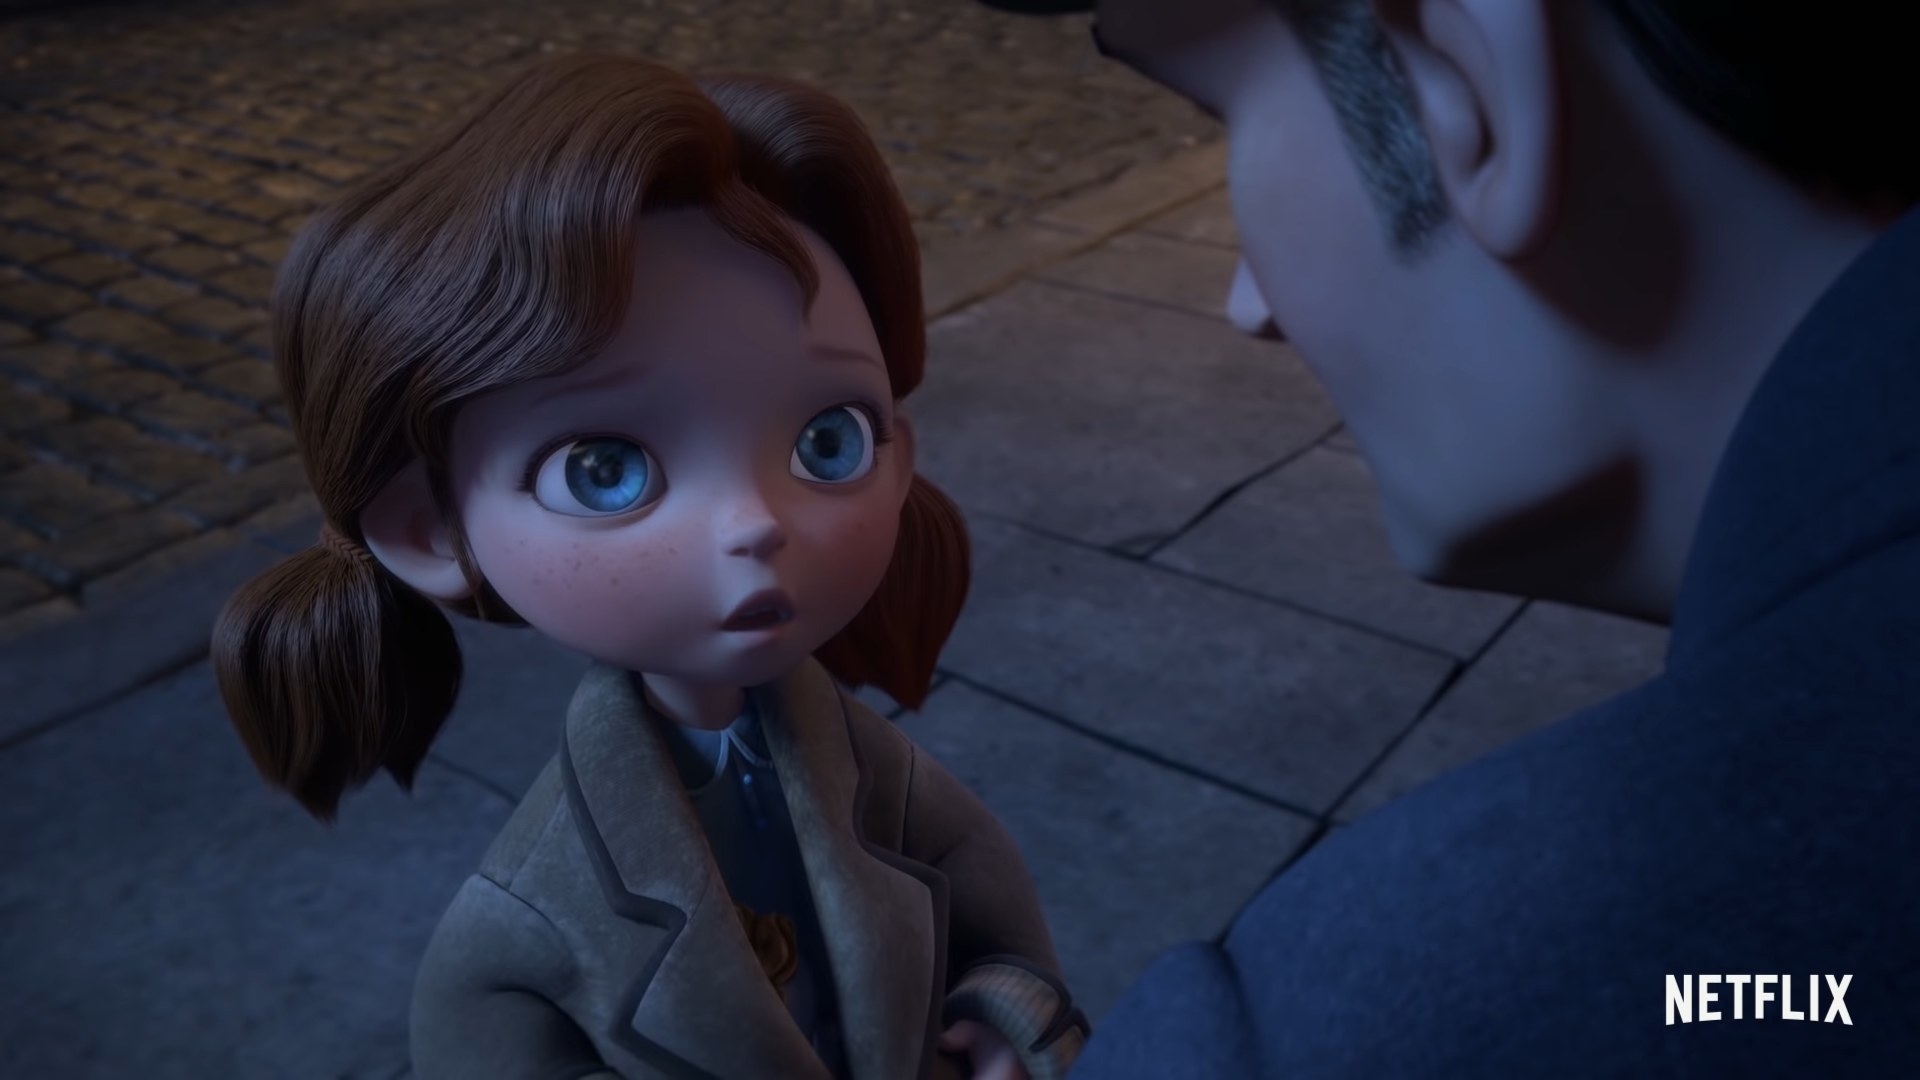 An animated girl looks at a cop